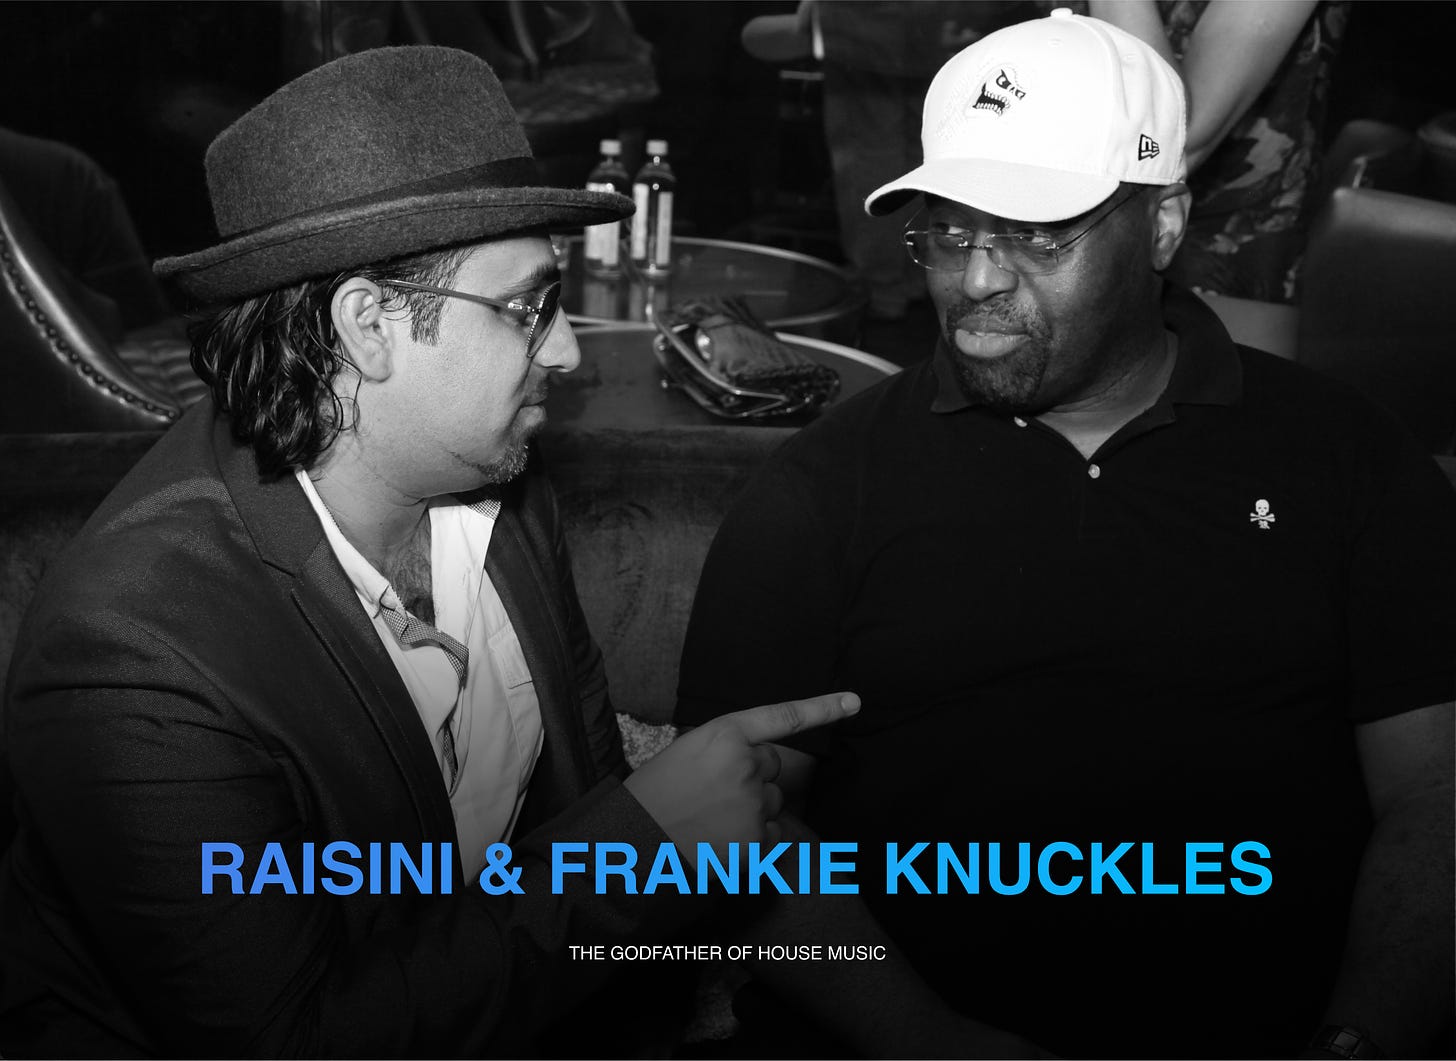 Raisini with the Frankie Knuckles, the Godfather of House Music